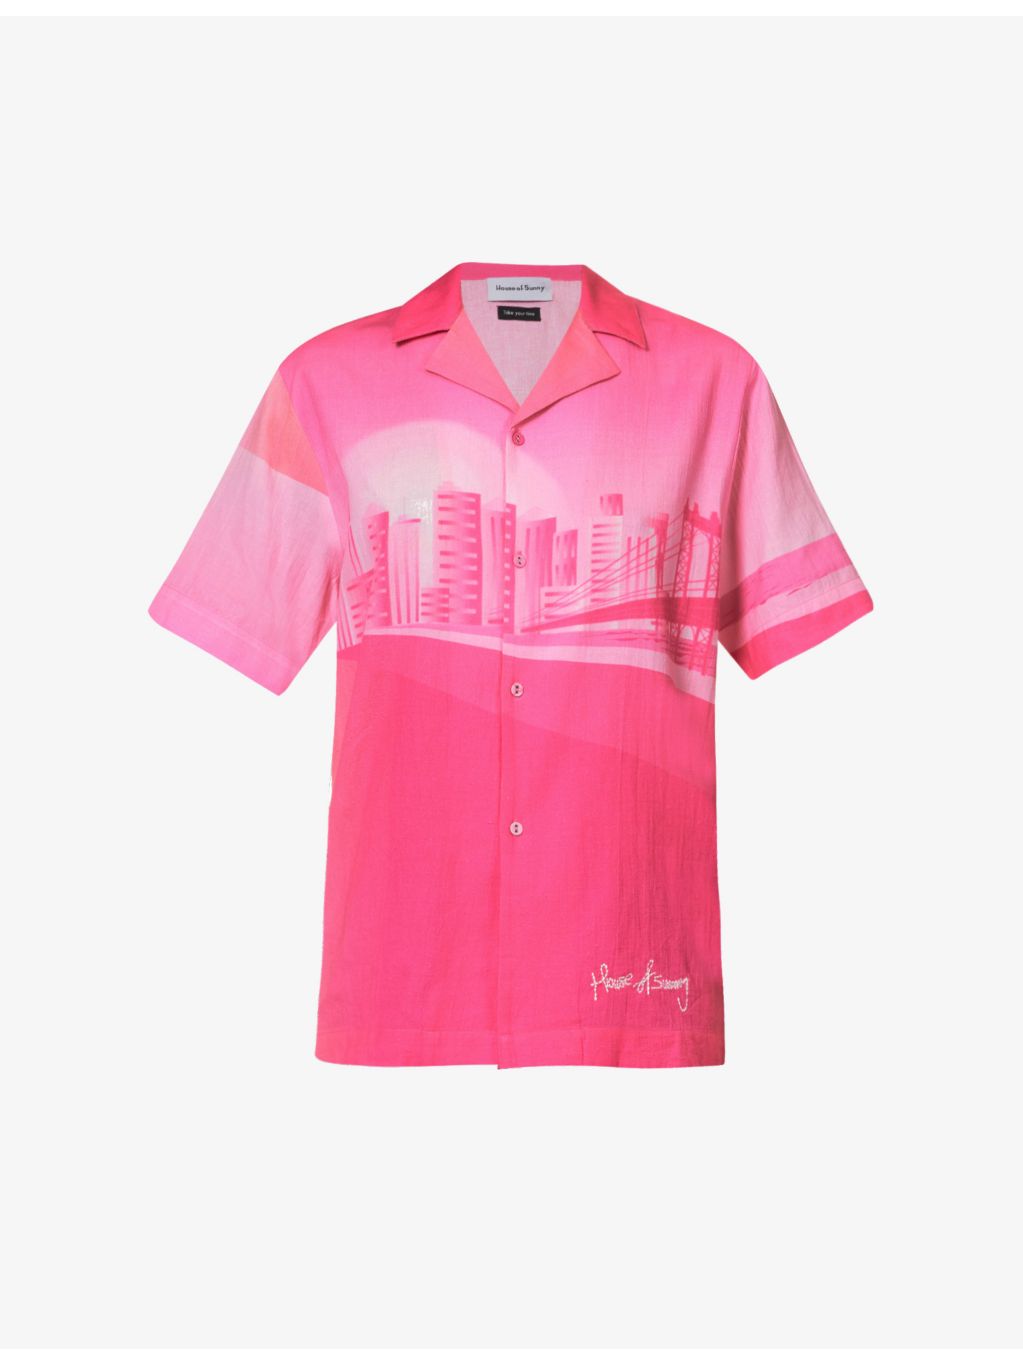 HOUSE OF SUNNY - The Rose Tint Shirt graphic-print regular-fit cotton and linen-blend shirt